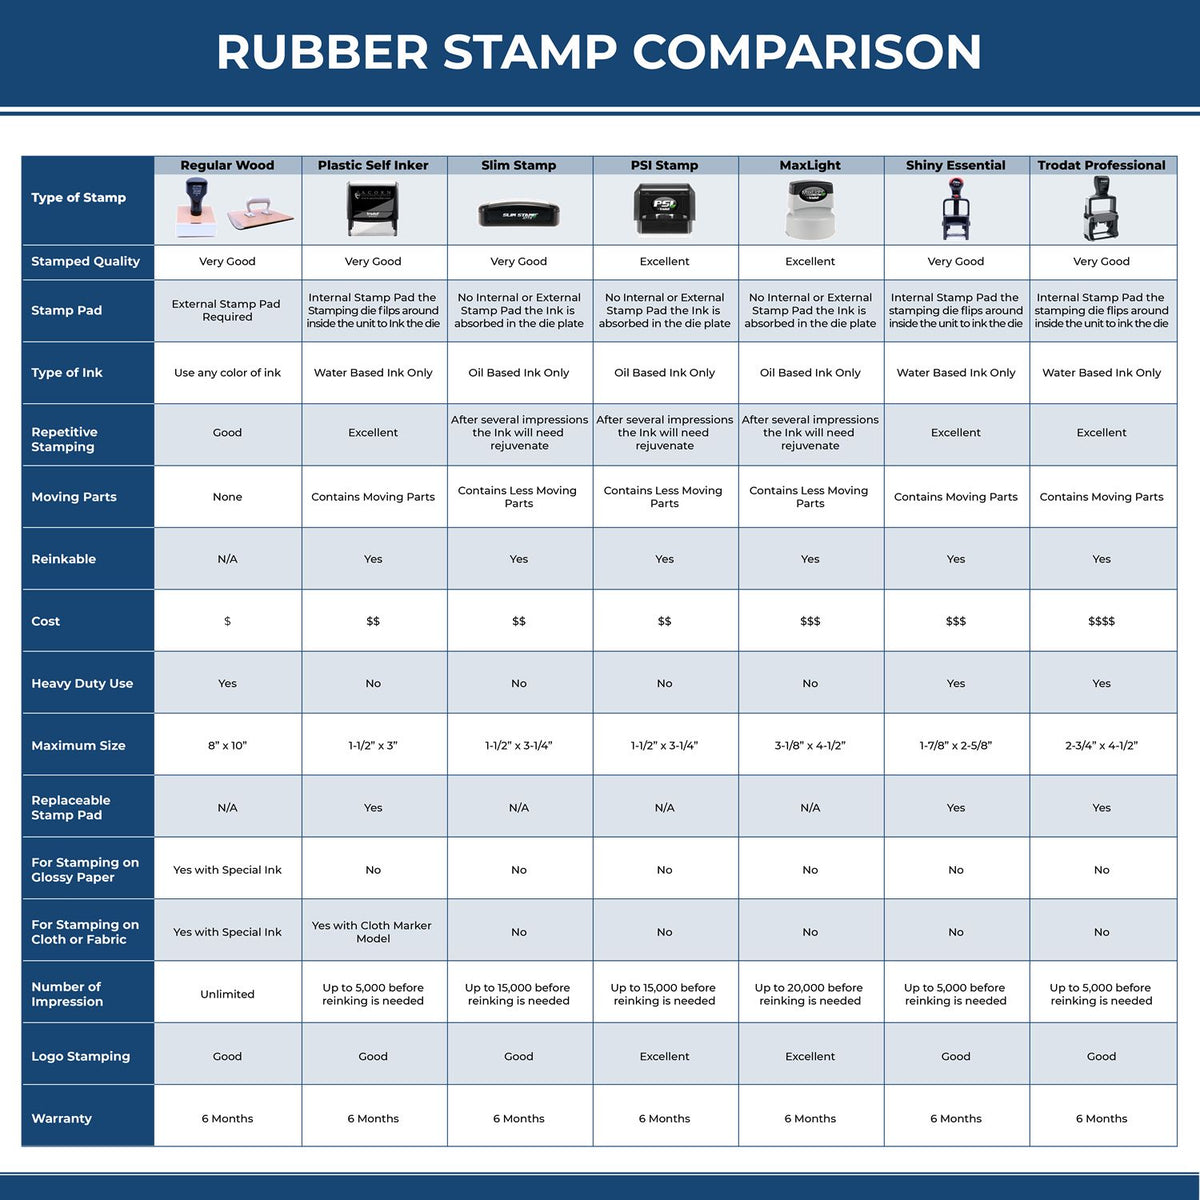 Large Self-Inking Credito Stamp 5531S Rubber Stamp Comparison